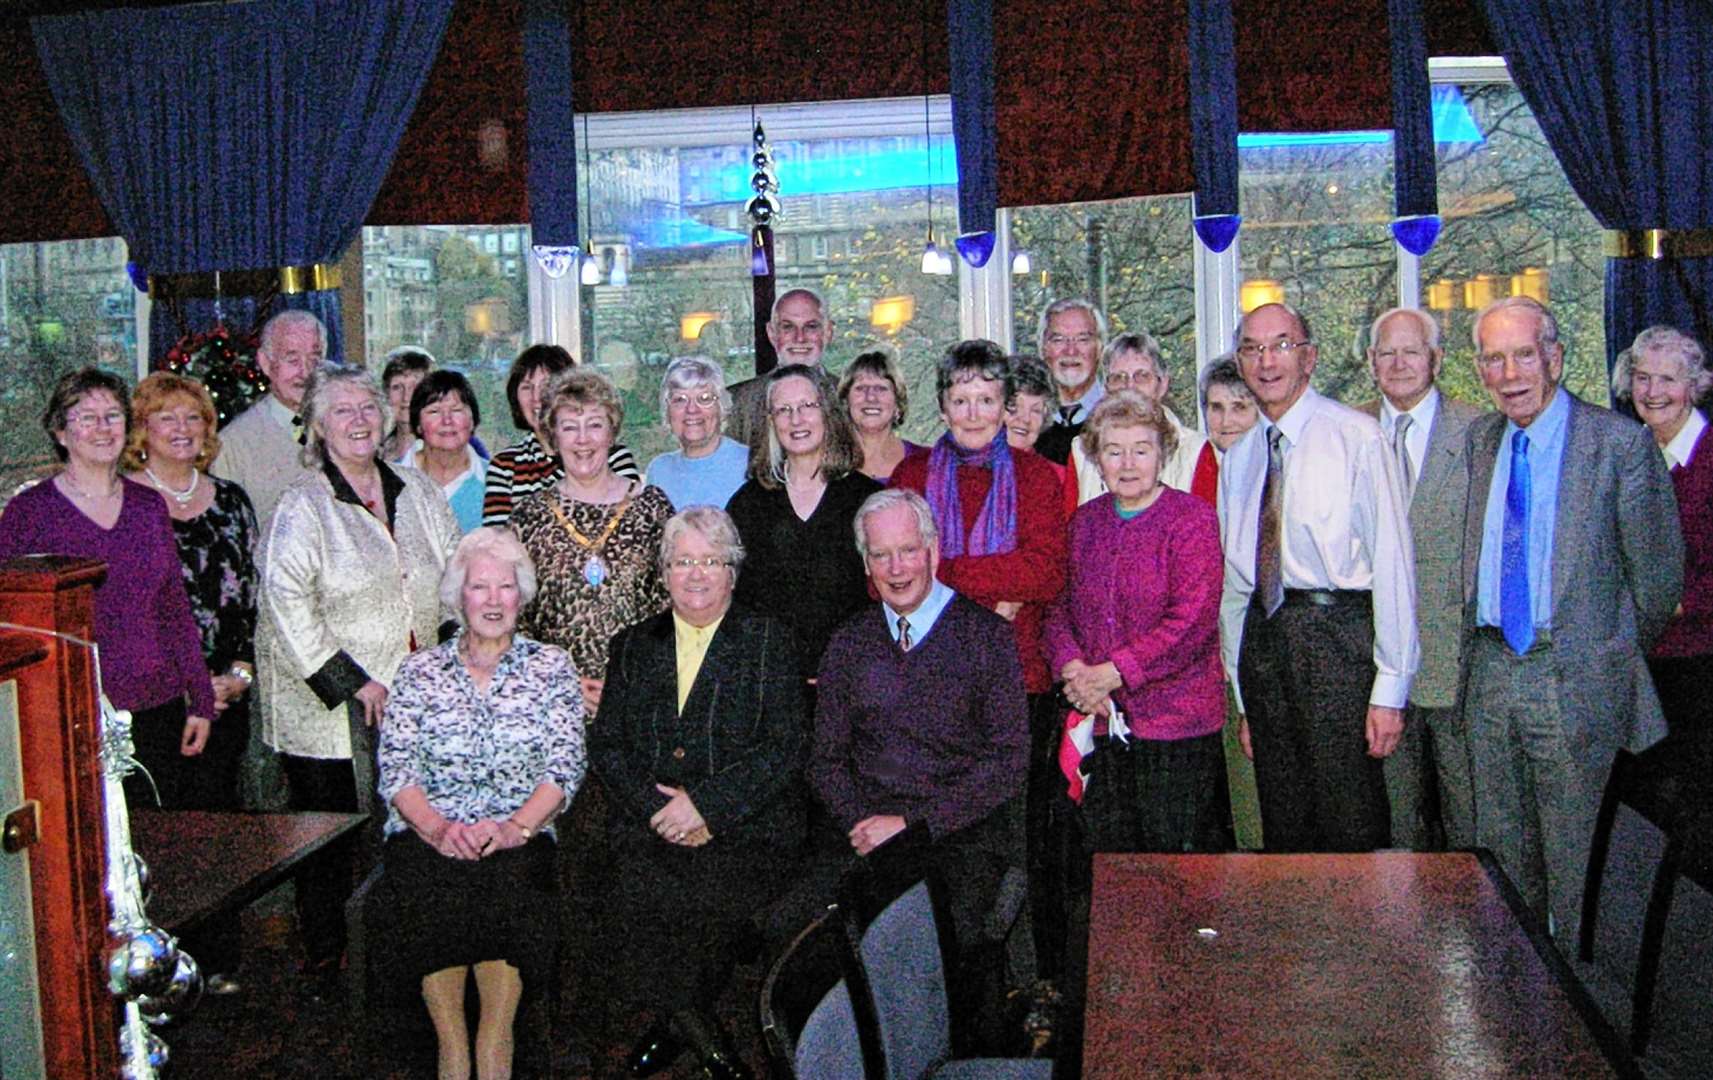 An Edinburgh Caithness Association lunch in 2011 in the Mercure hotel in the city’s Princes Street. Anne Dunnett, Lord-Lieutenant of Caithness, was guest speaker, while Arthur Brown and Jessie Whyte – who had provided music for dancing at the association's ceilidhs for many years – were presented with Caithness Glass paperweights.